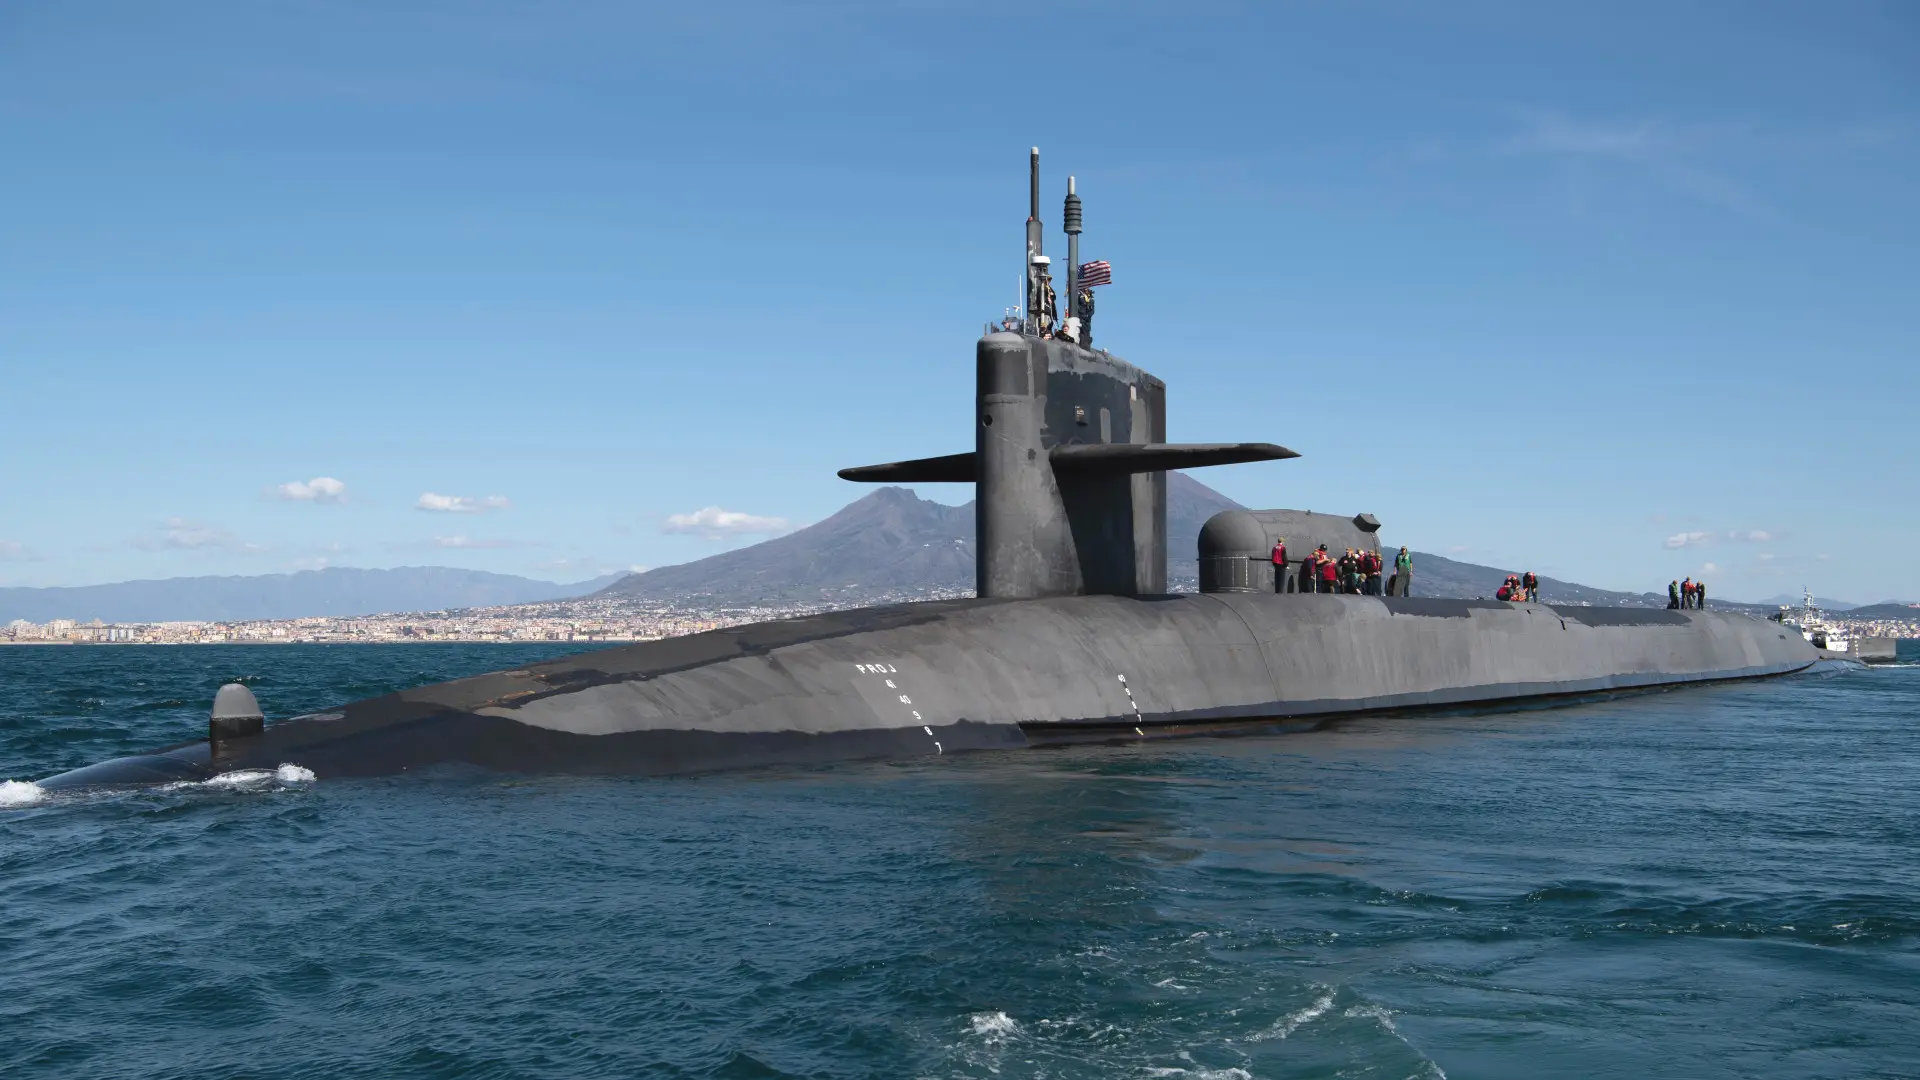 US Navy to retire all Ohio-class submarines carrying 154 BGM-109 Tomahawk cruise missiles by 2028